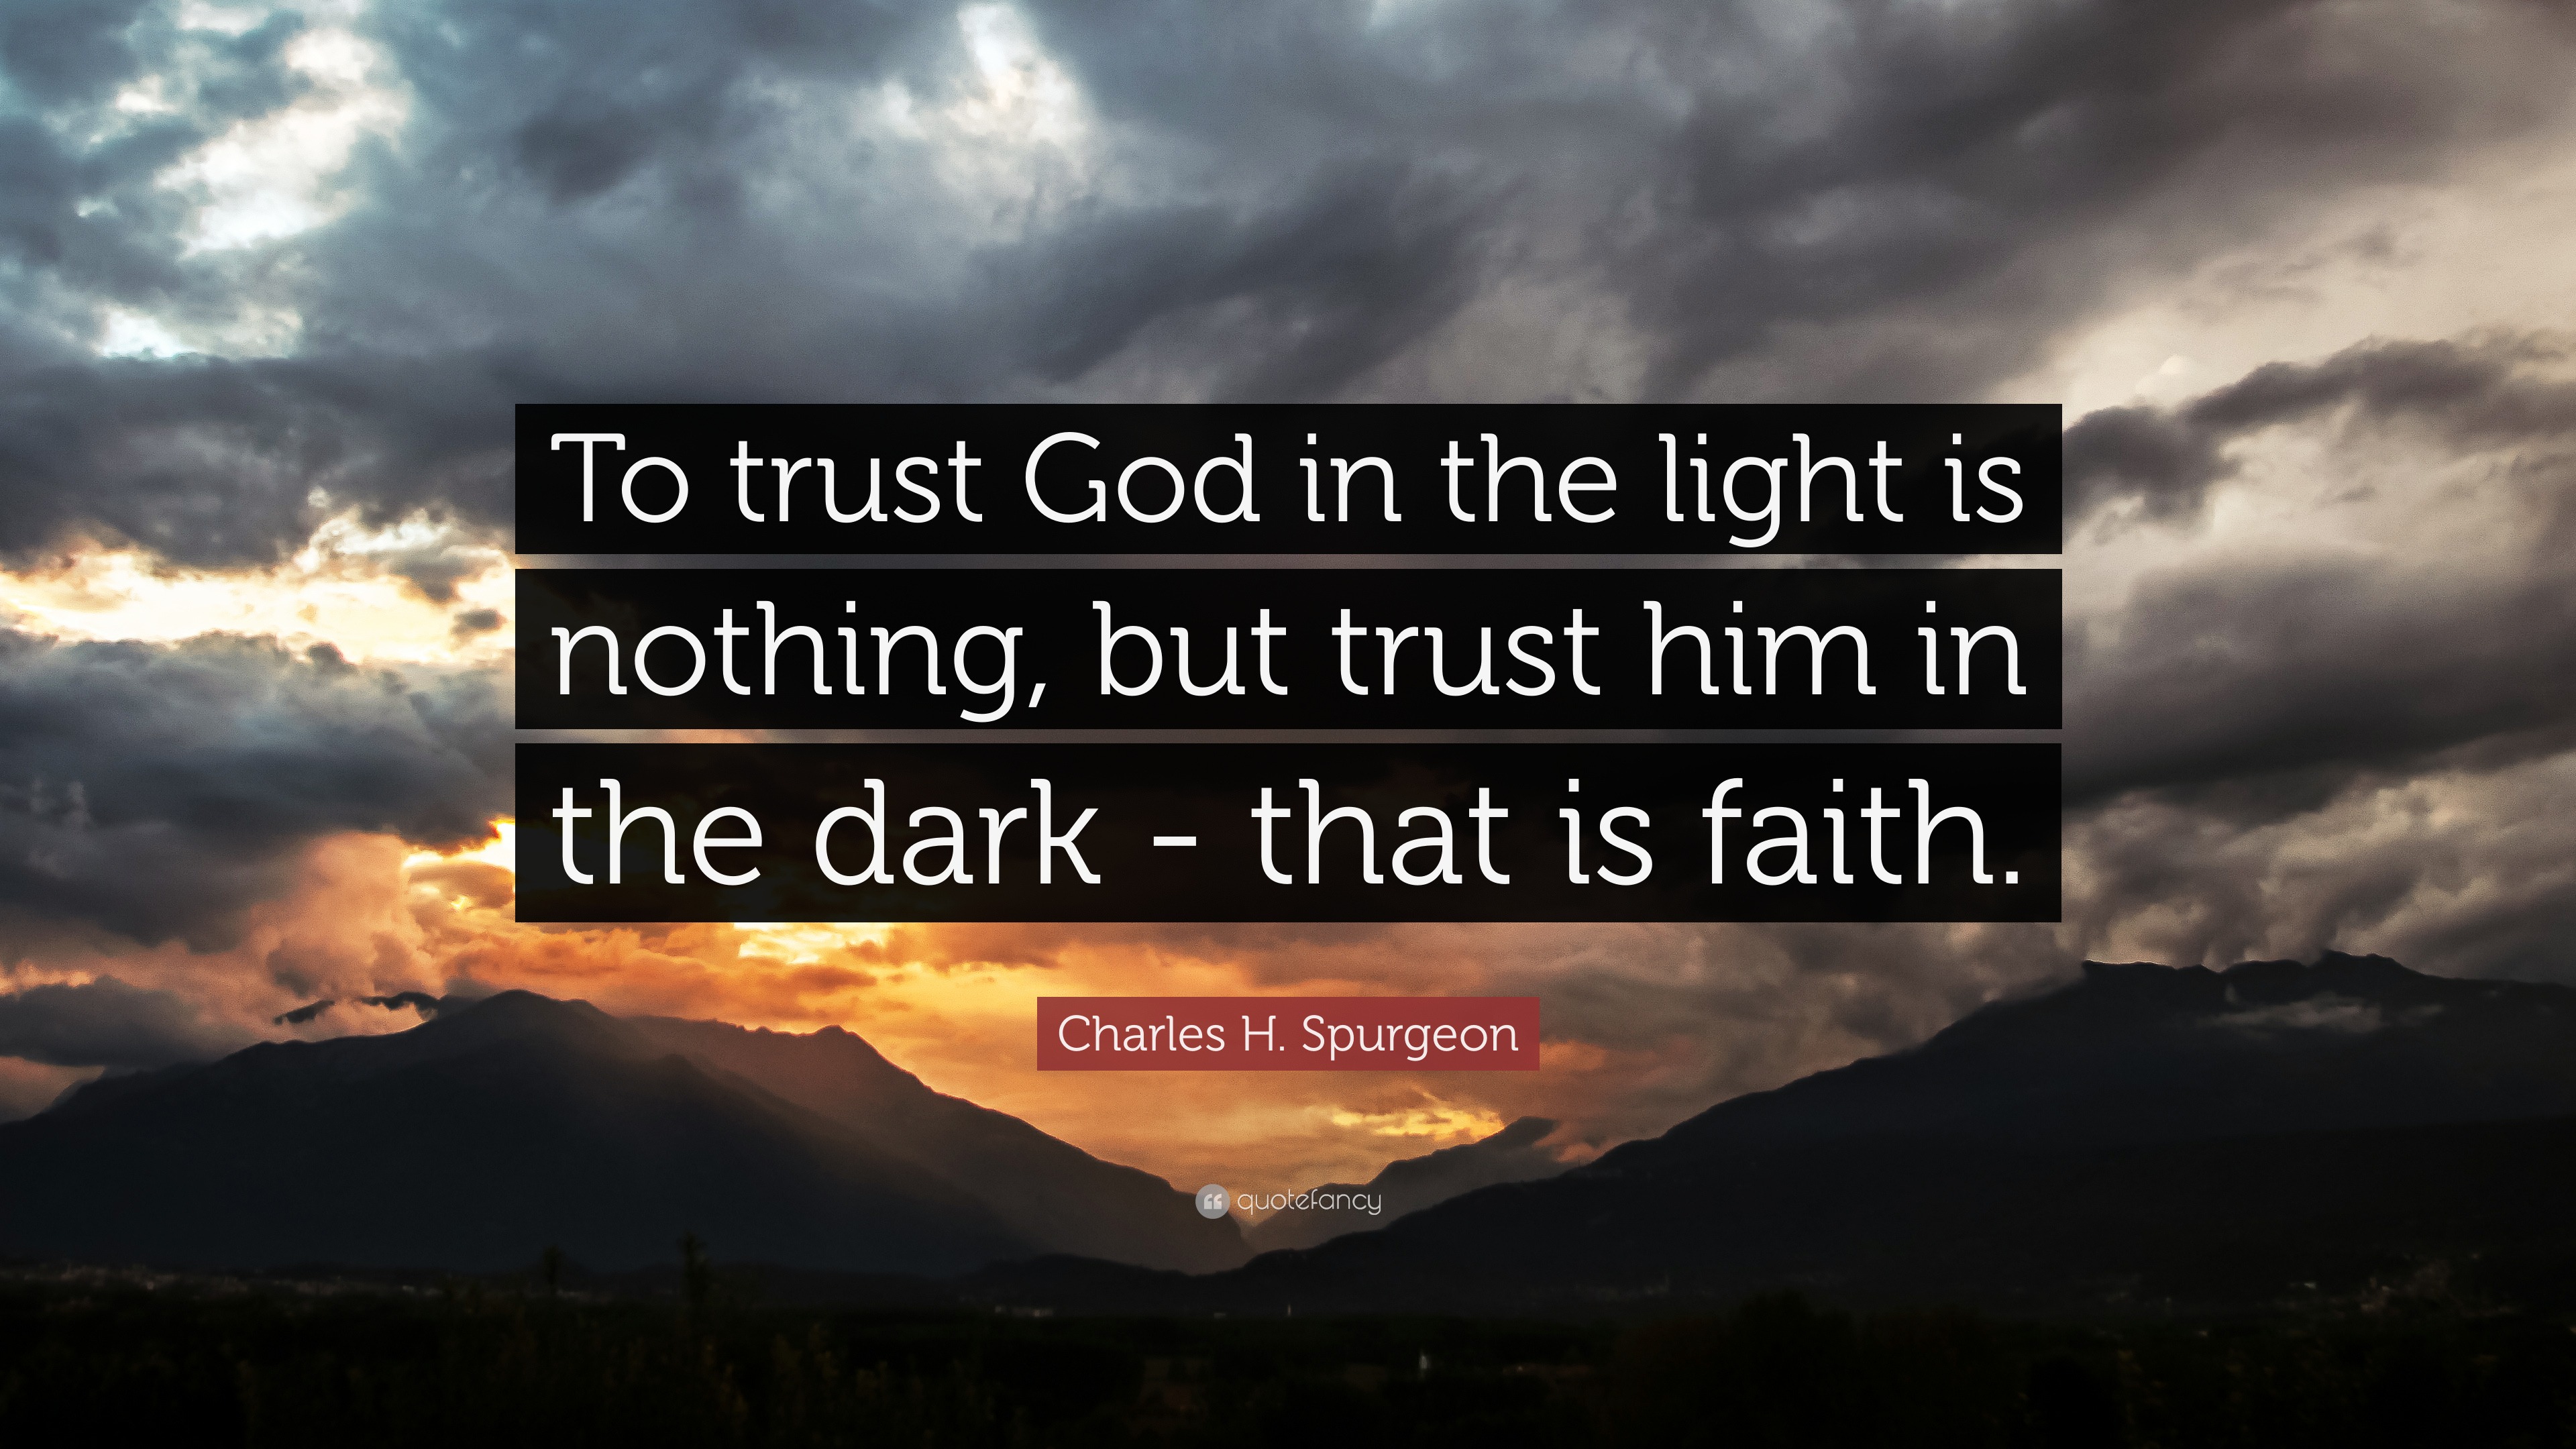 Charles H Spurgeon Quote  To trust  God  in the light is 